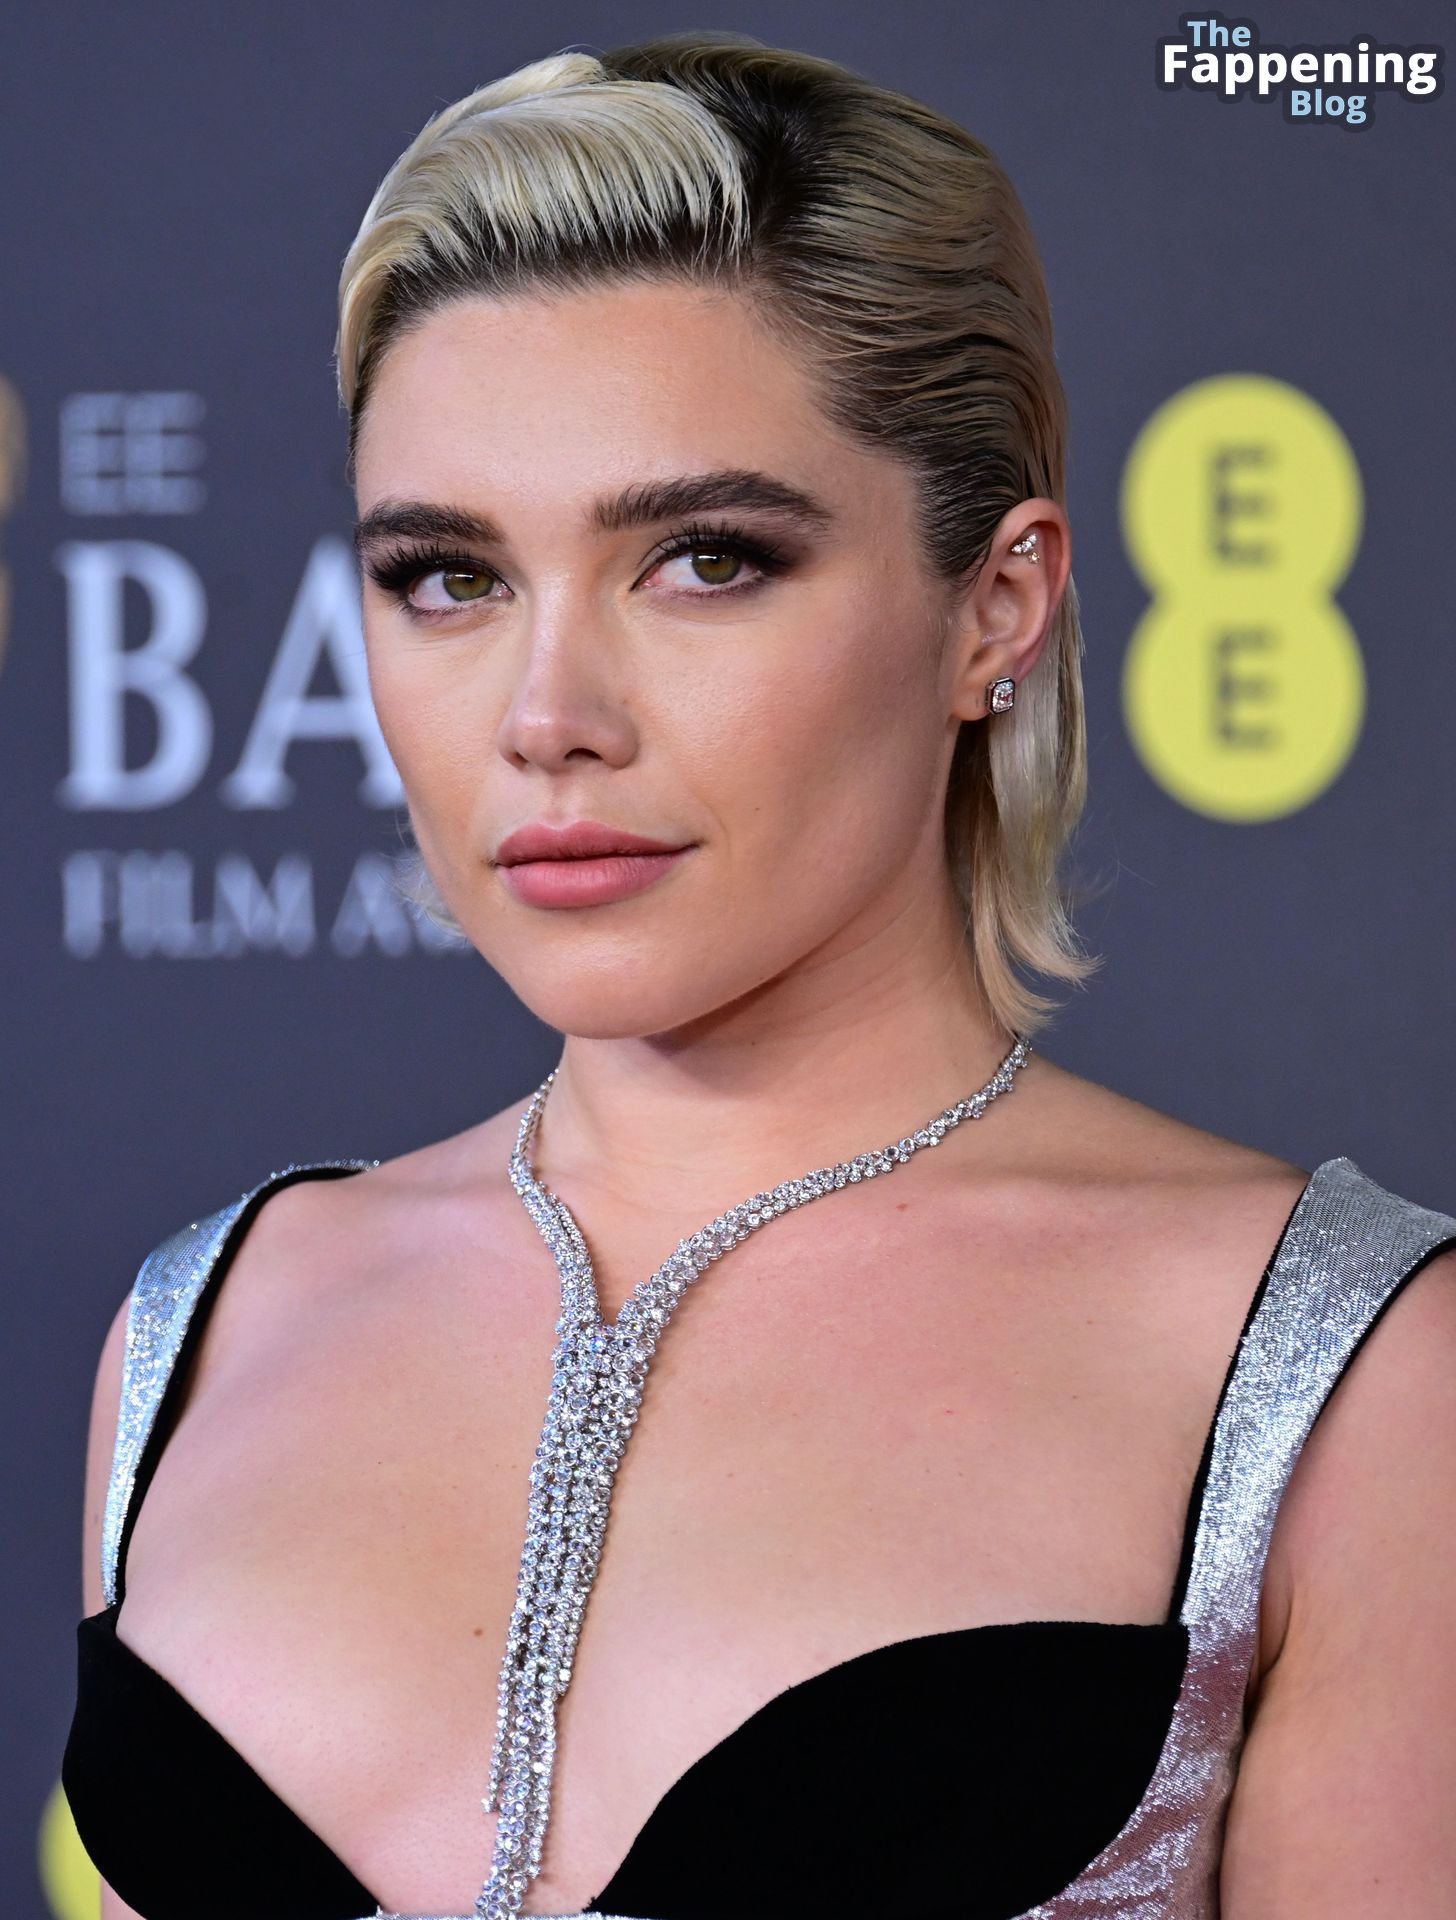 Florence-Pugh-Sexy-36-The-Fappening-Blog-2.jpg